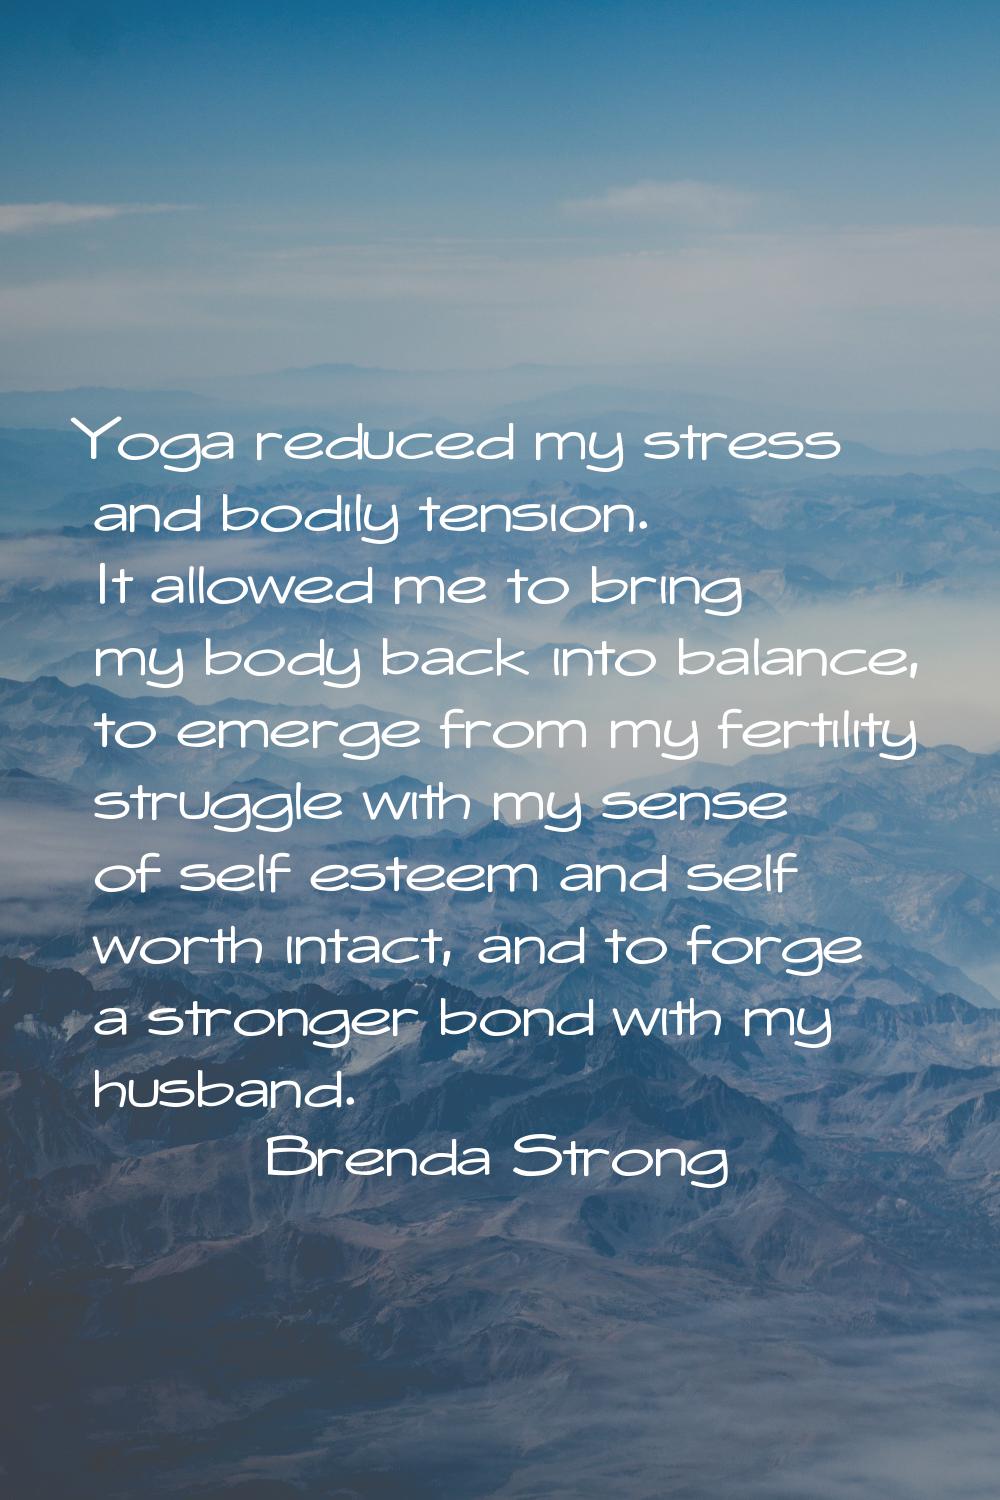 Yoga reduced my stress and bodily tension. It allowed me to bring my body back into balance, to eme